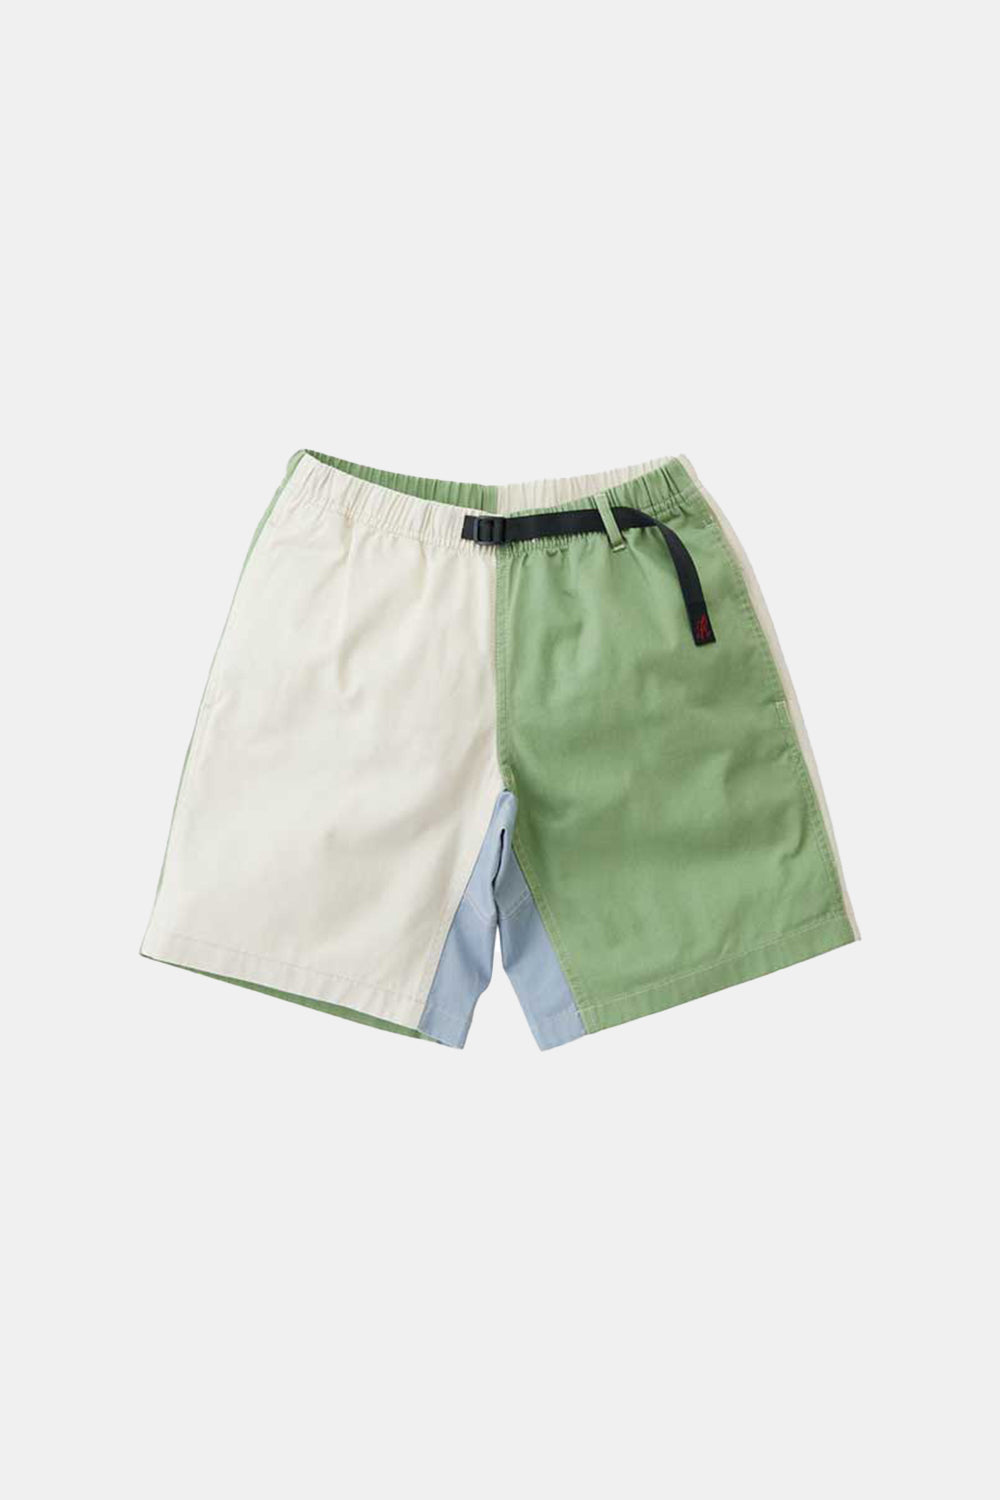 Gramicci G-Shorts Double-Ringspun Organic Cotton Twill (Crazy) | Number Six